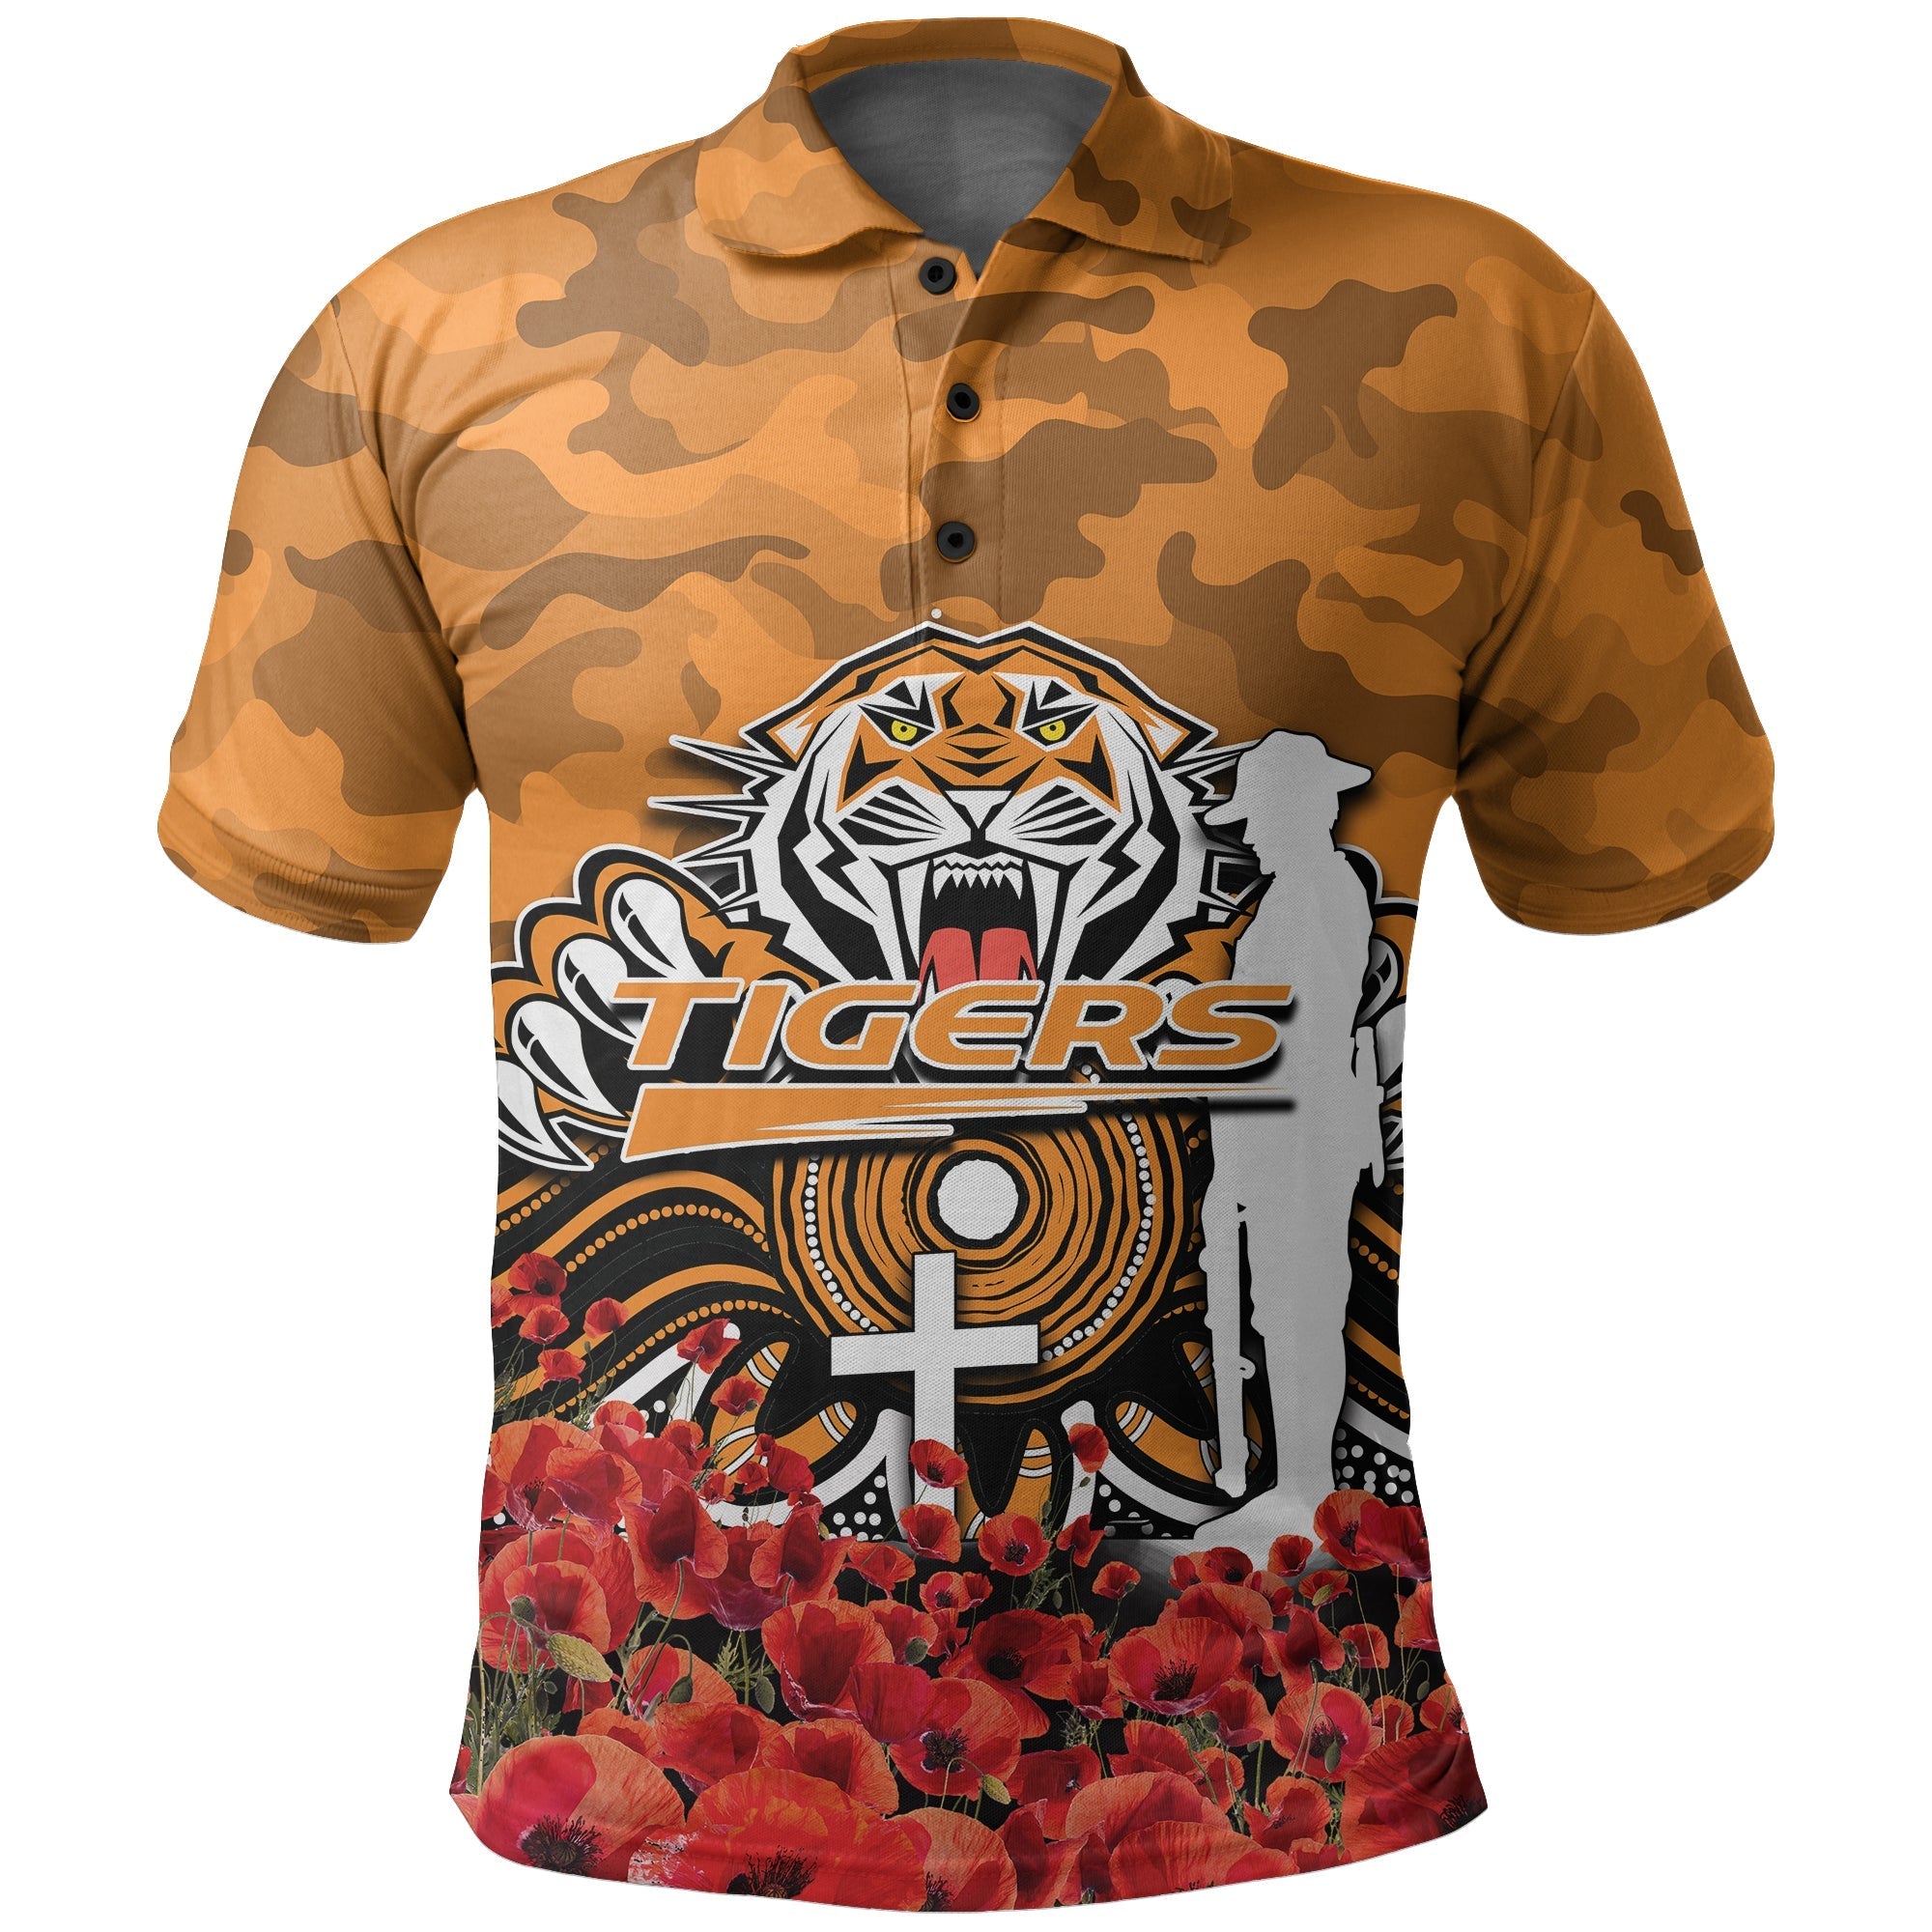 wests-tigers-polo-shirt-anzac-day-poppy-flowers-with-army-patterns